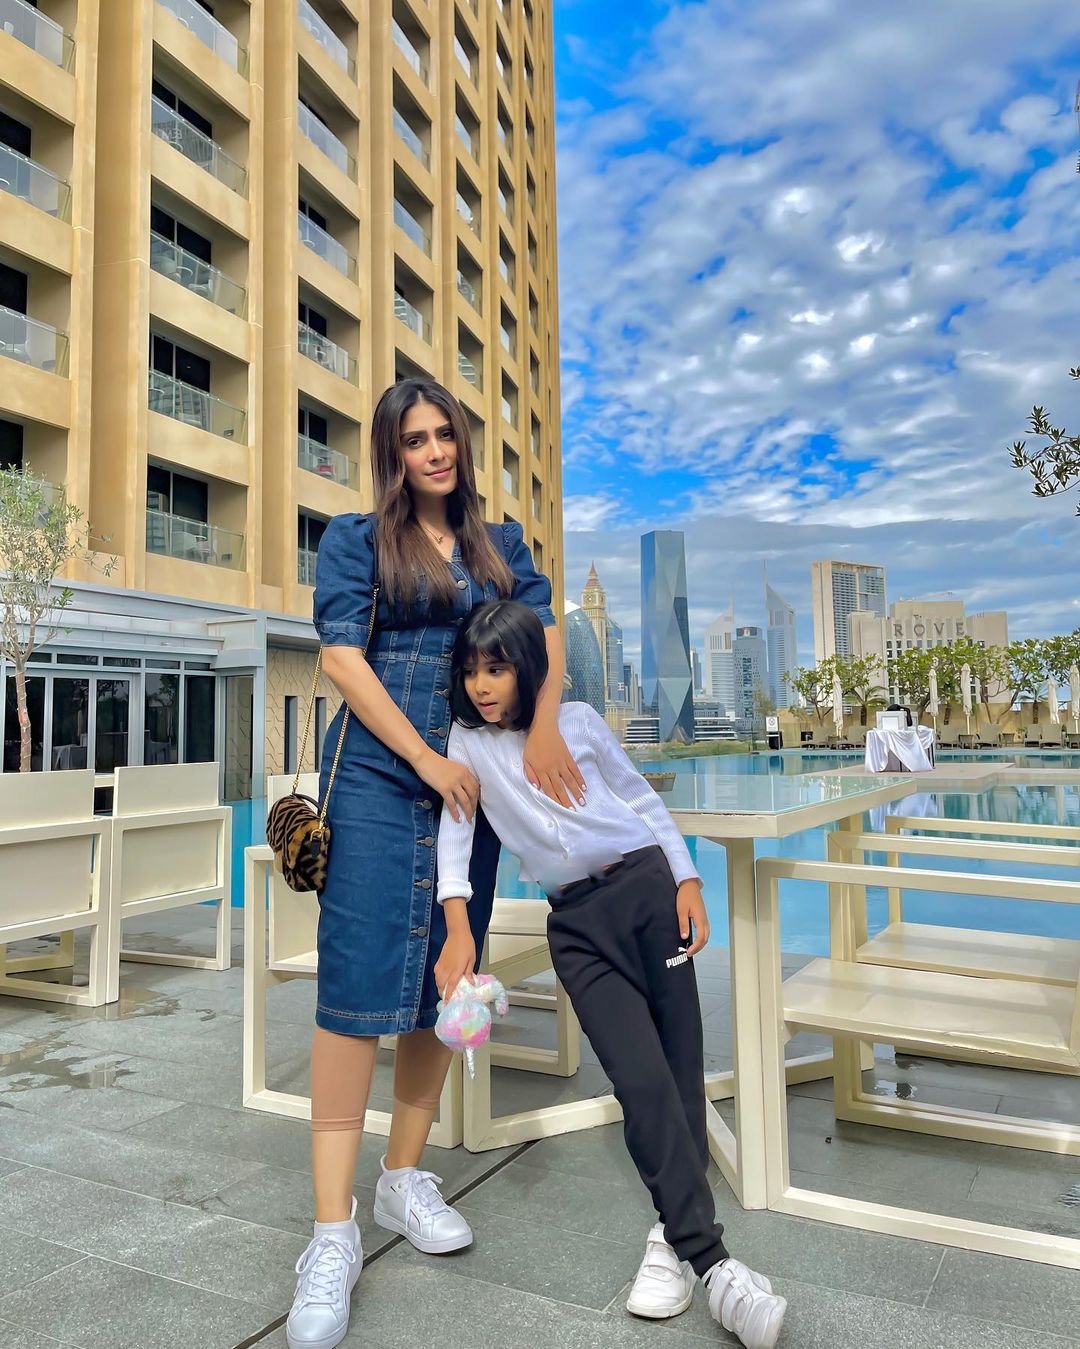 Ayeza Khan pictures from Dubai are super awesome